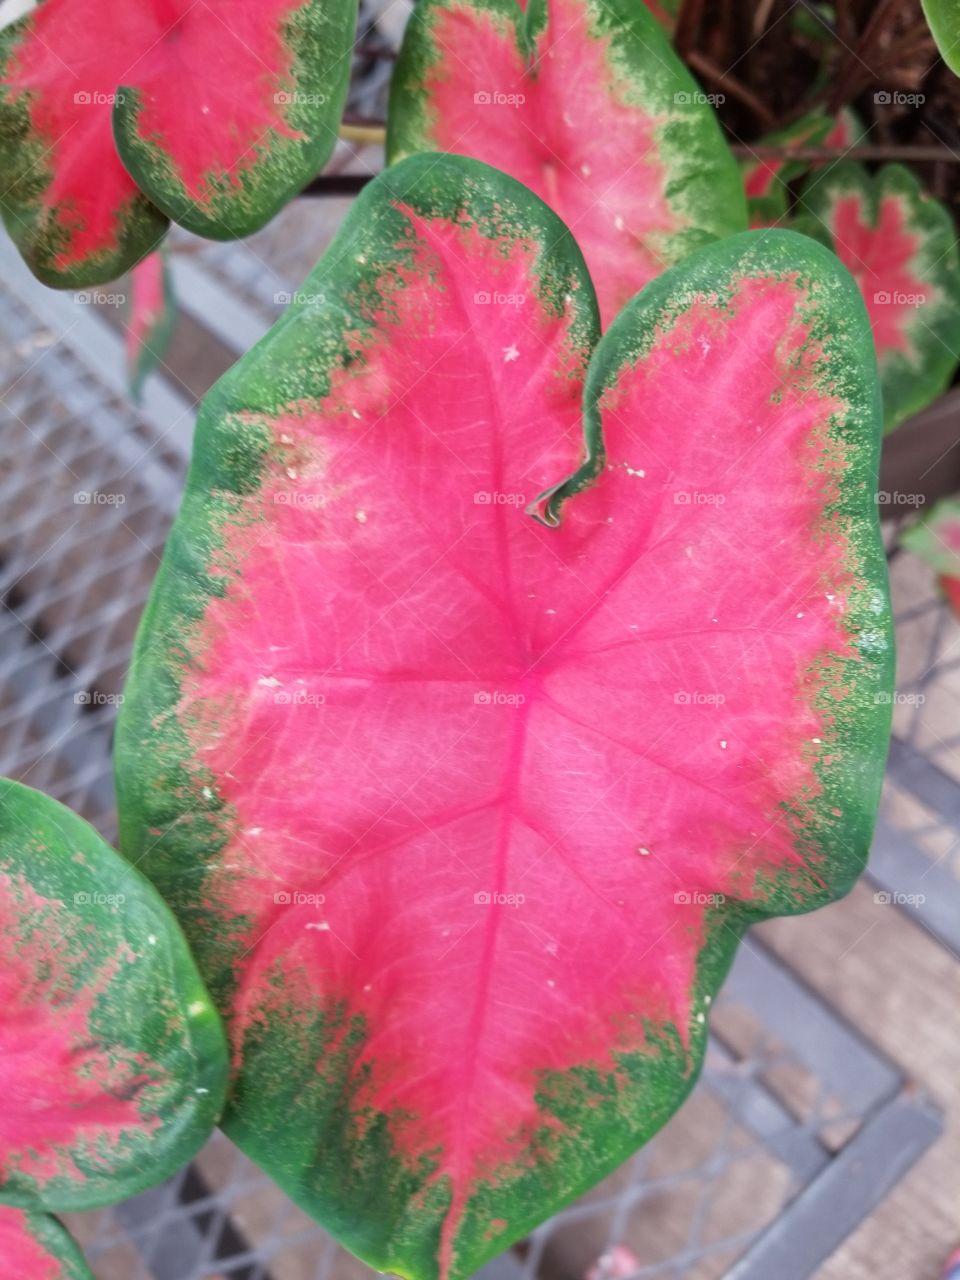 This leave with its green outter layer with my vibrant pink center looks like a heart of natures love growing wildly